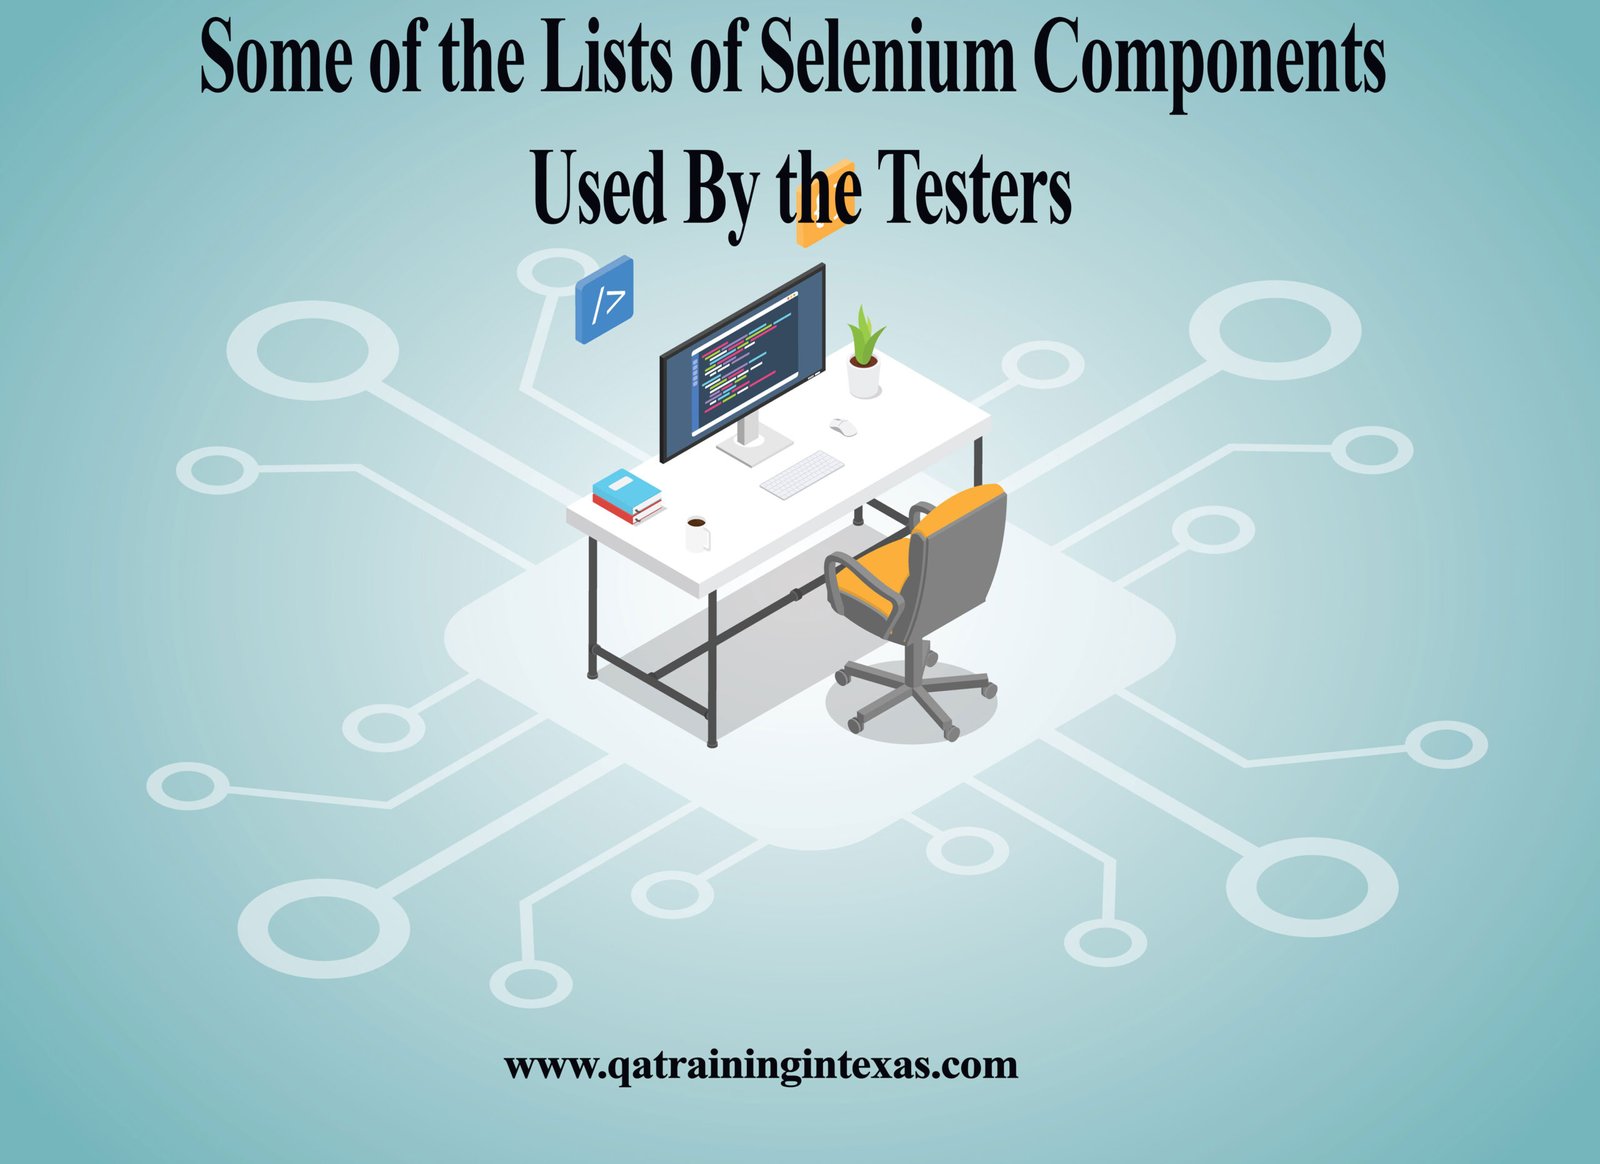 Some of the Lists of Selenium Components Used By the Testers